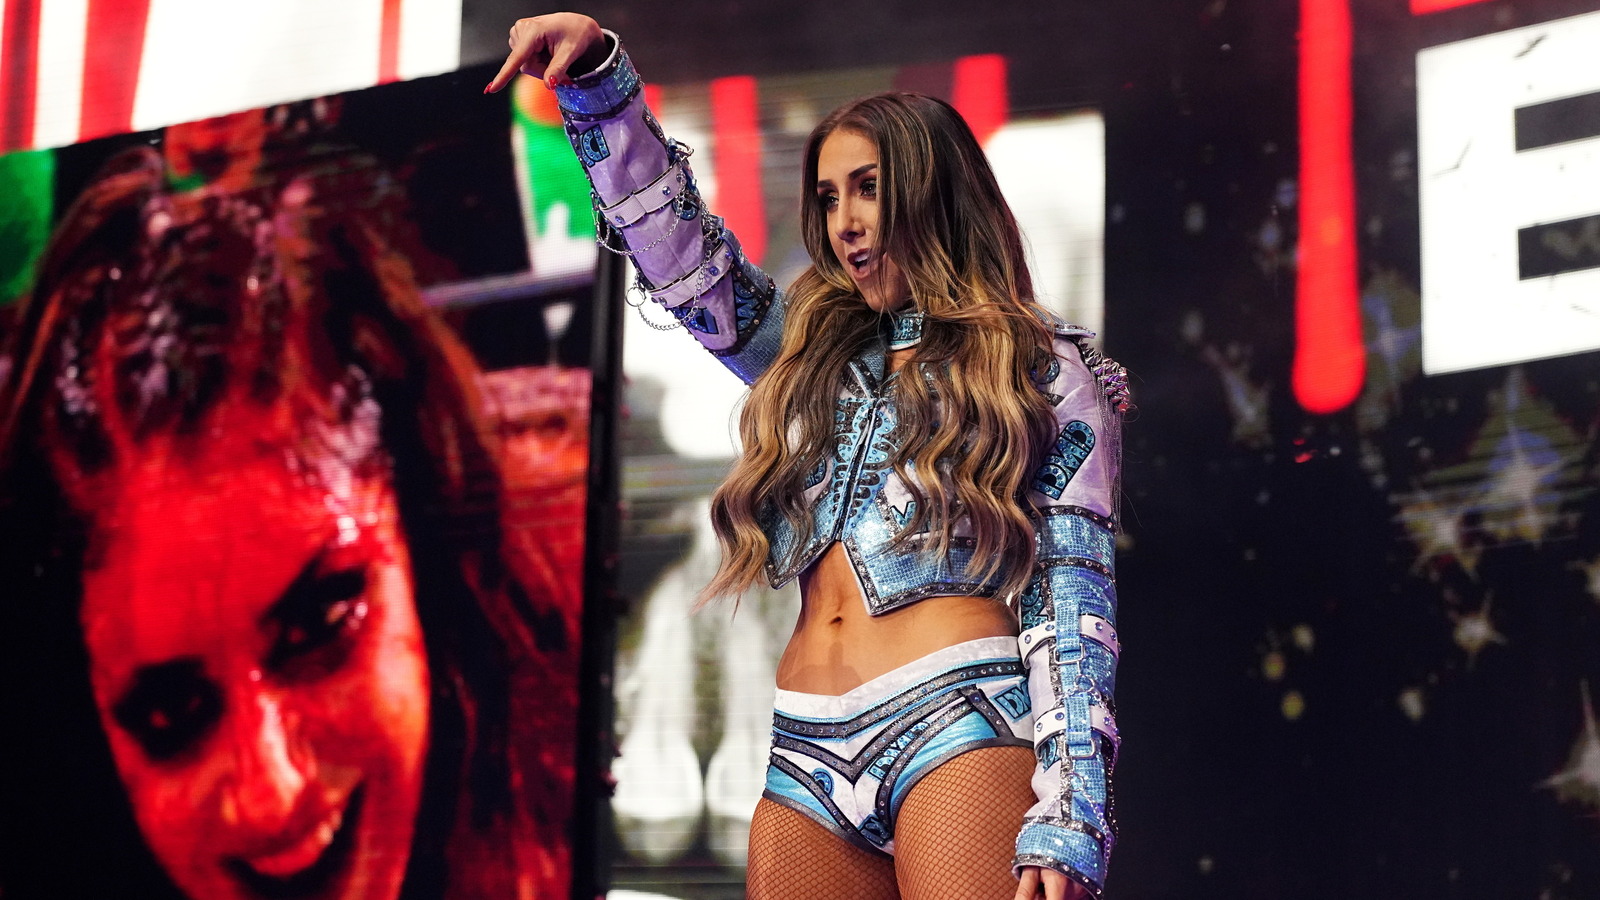 Britt Baker Reacts To Finn Balor Stomping On Pittsburgh Steelers Rally Towel At WWE Payback